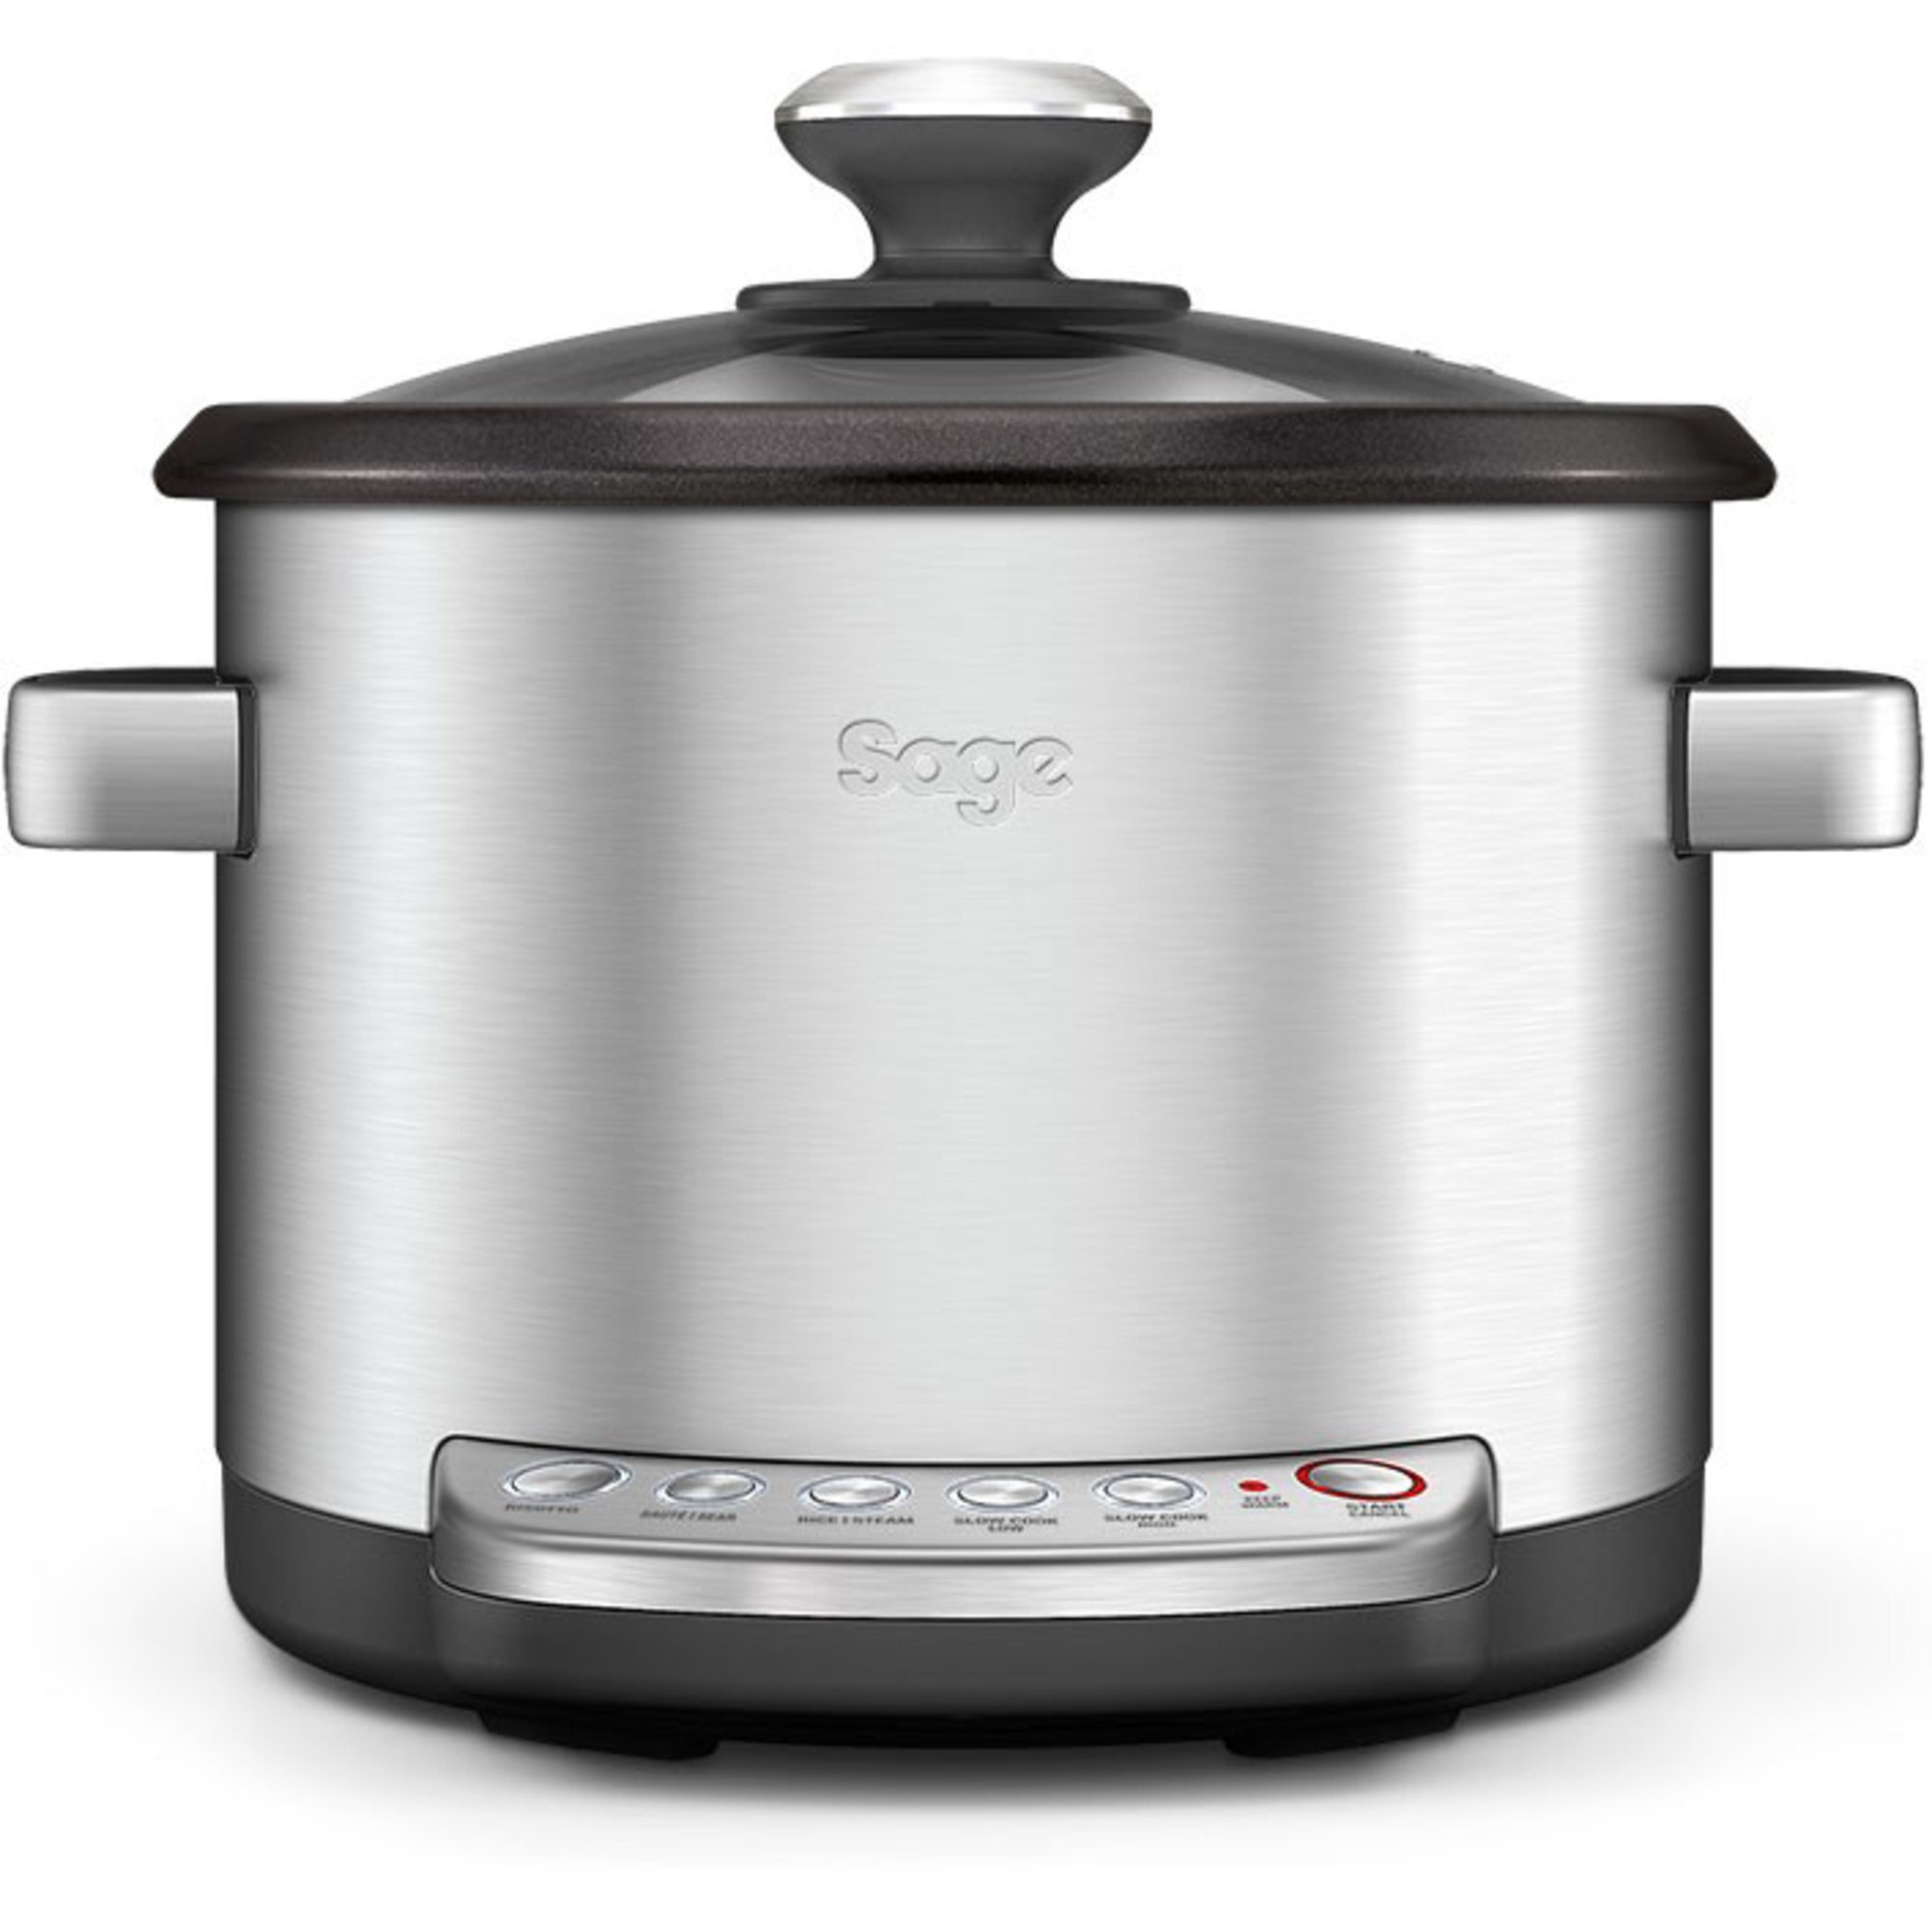 Sage BRC600 The Risotto Plusâ¢ Riskoger